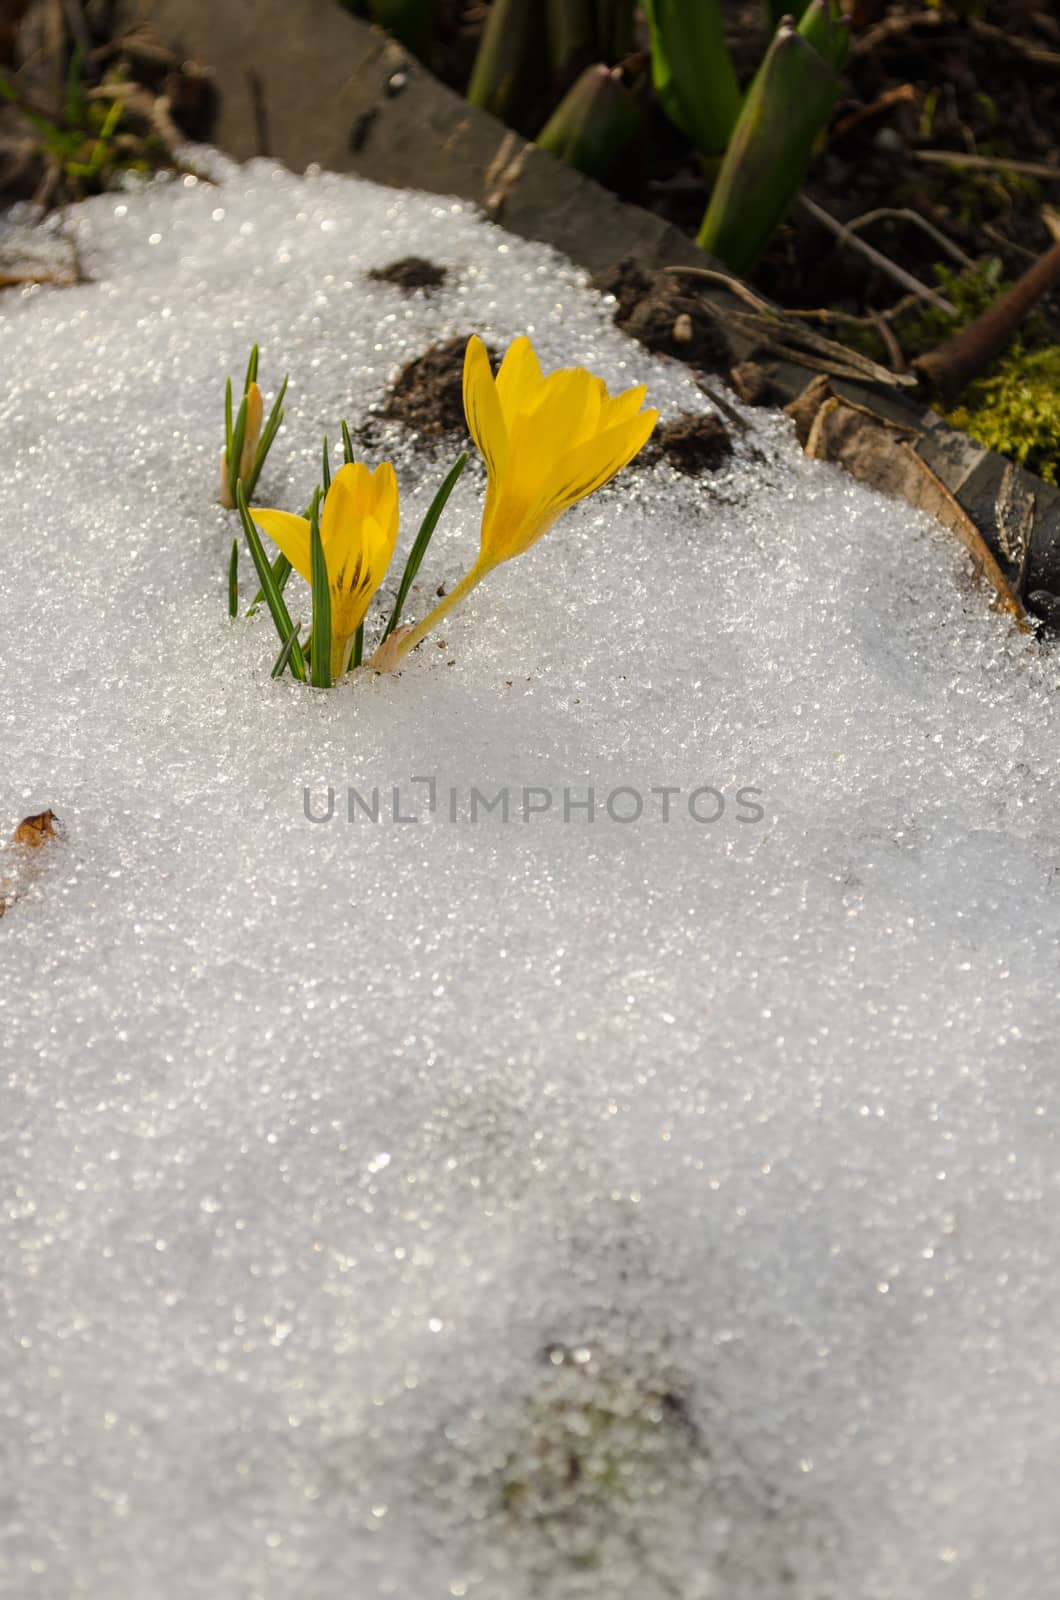 first spring crocus flowers erupted from snow by sauletas